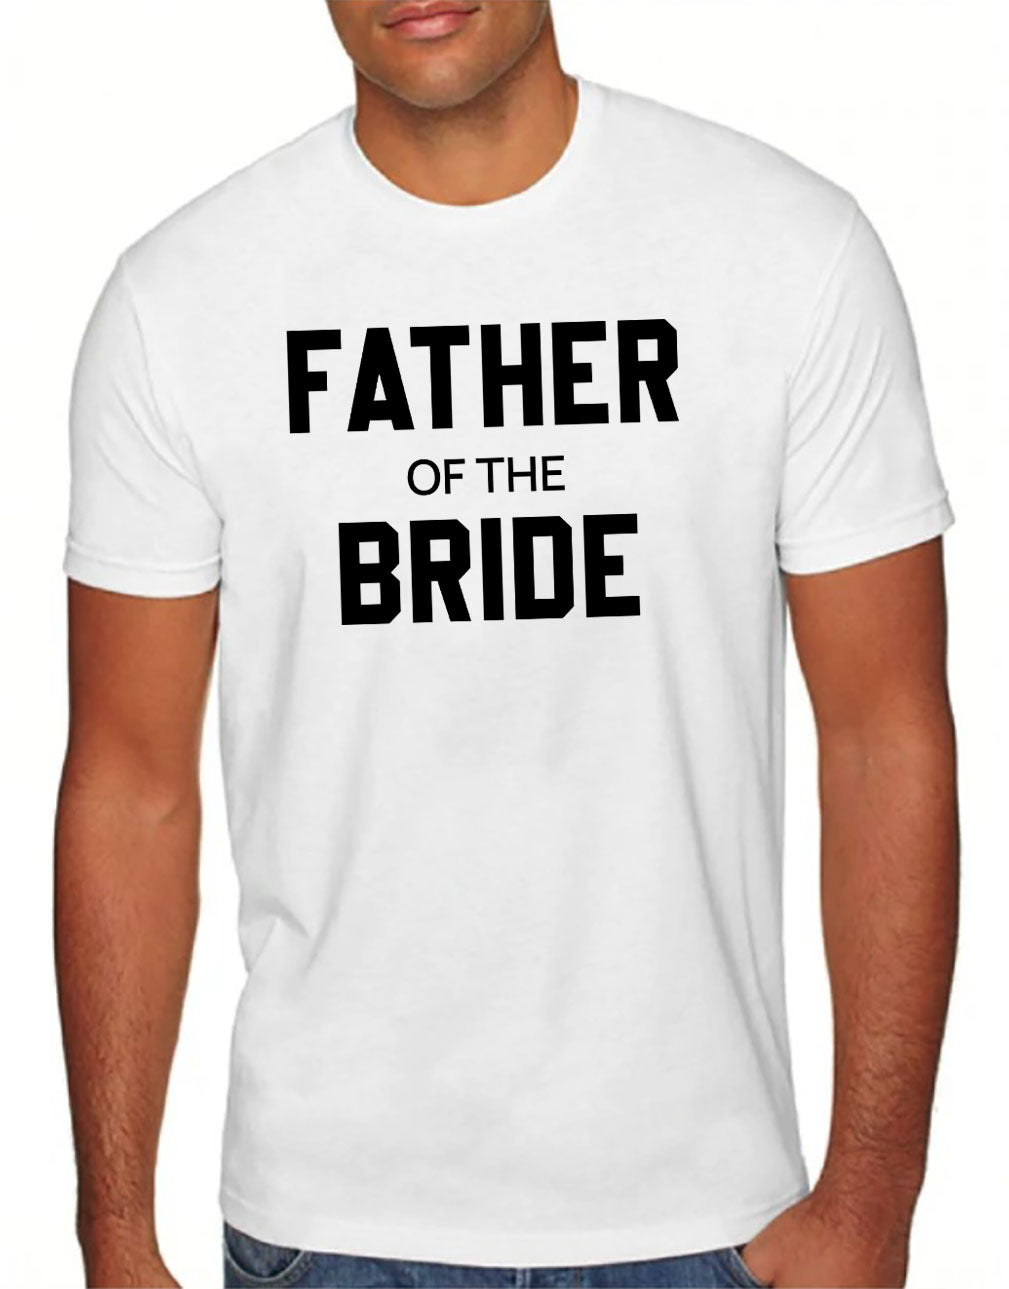 Father of the Bride, Father of the Groom Tees